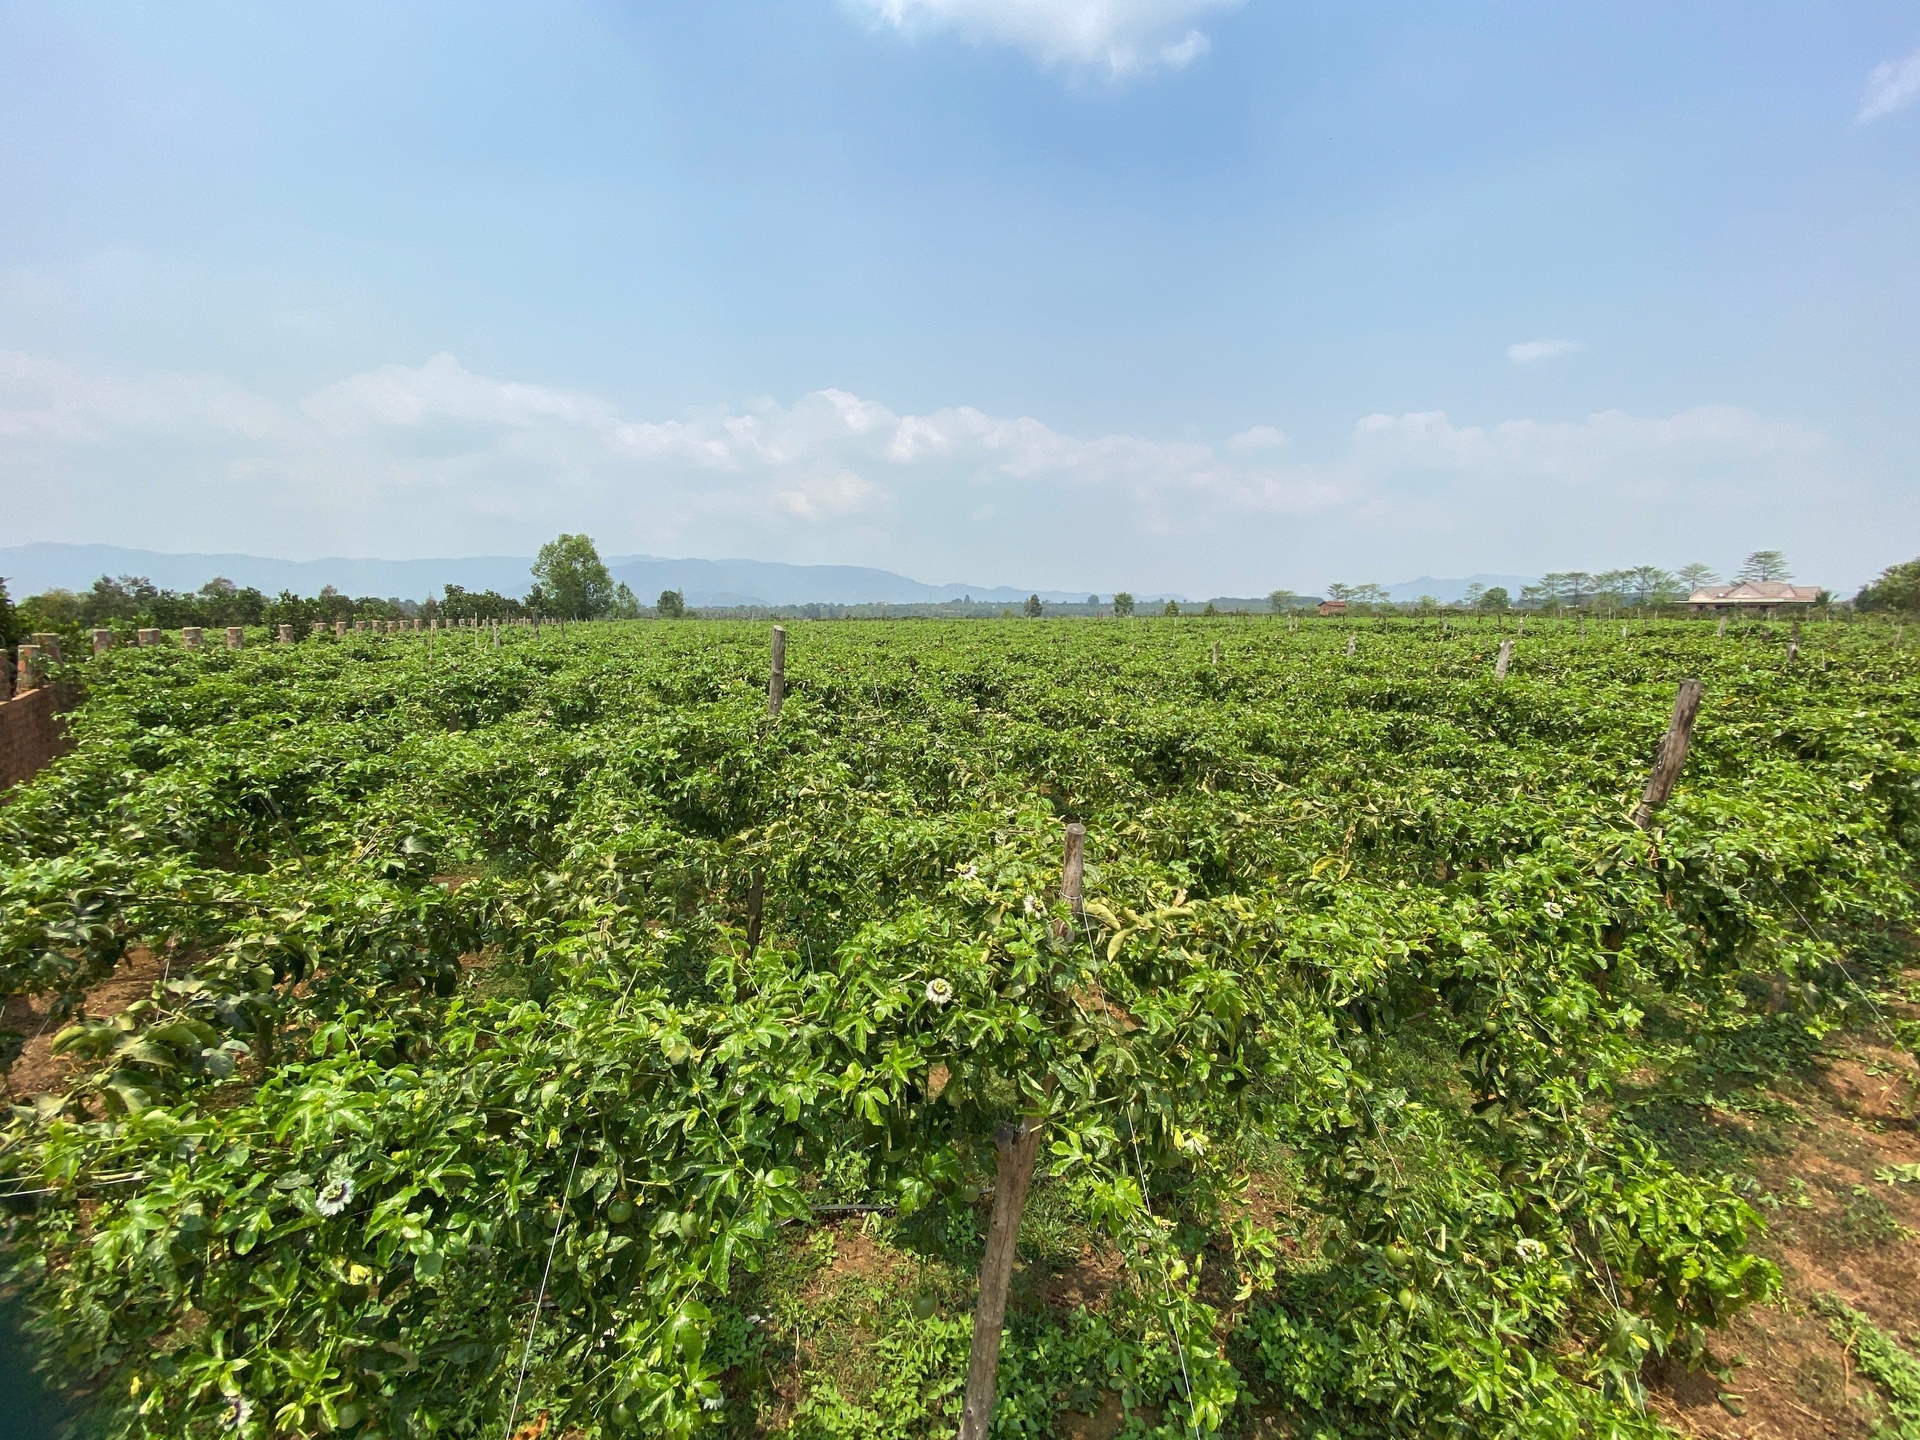 Gia Lai province has over 5,000 hectares of passion fruit. Photo: Tuan Anh.